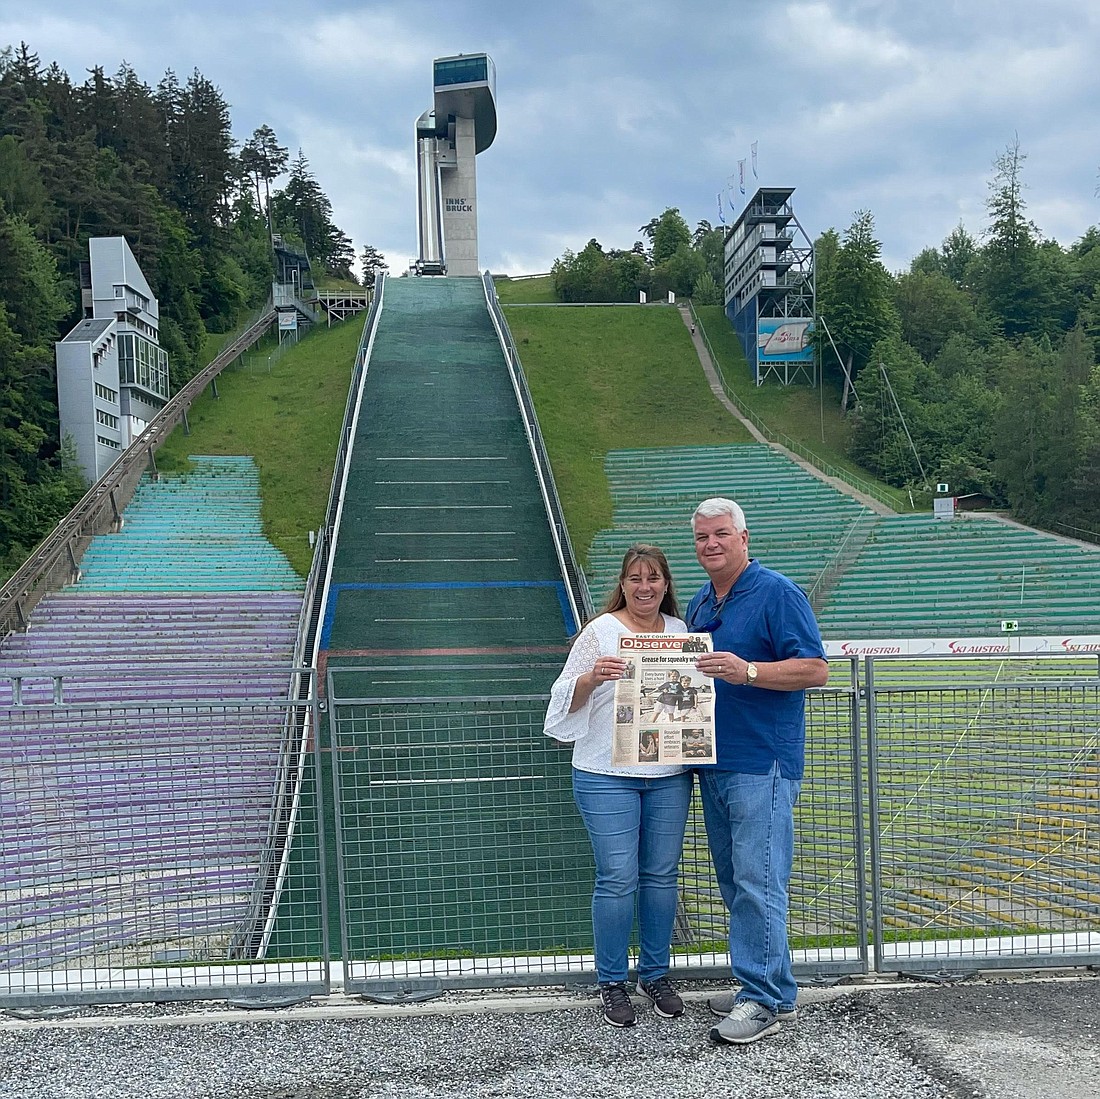 Pam and Russell Hyatt remembered to pack their Observer for their trip to the Bergisel Ski Jump in Innsbruck, Austria. They won the It's Read Everywhere contest and the grand prize of a seven-day cruise.